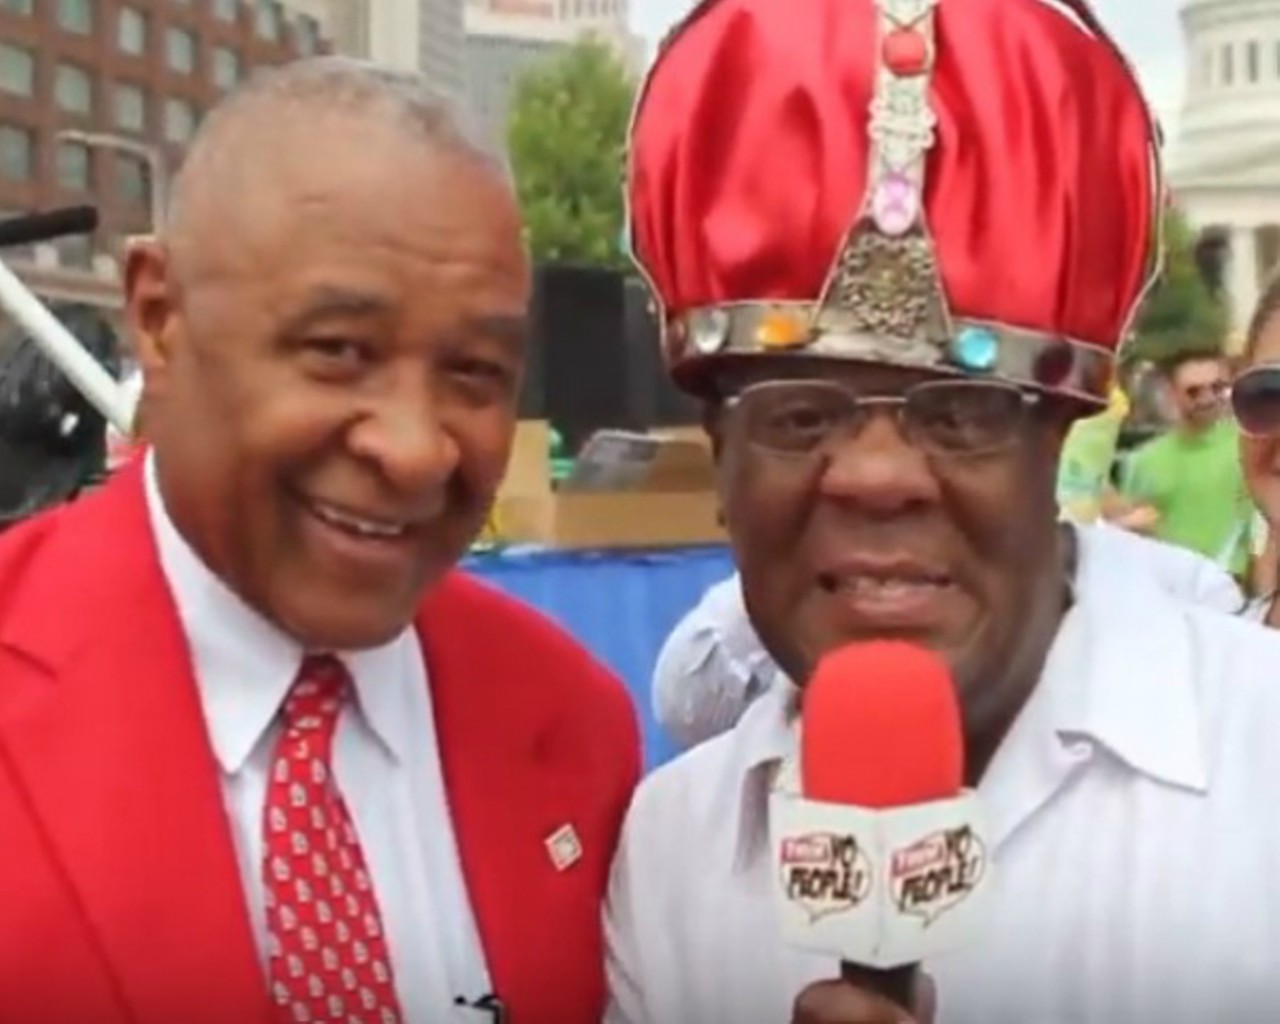 Mr. Gary (right, with Ozzie Smith) of Them Yo People
"Whatta ya say, whatta ya say?"
Photo credit: screengrab from YouTube